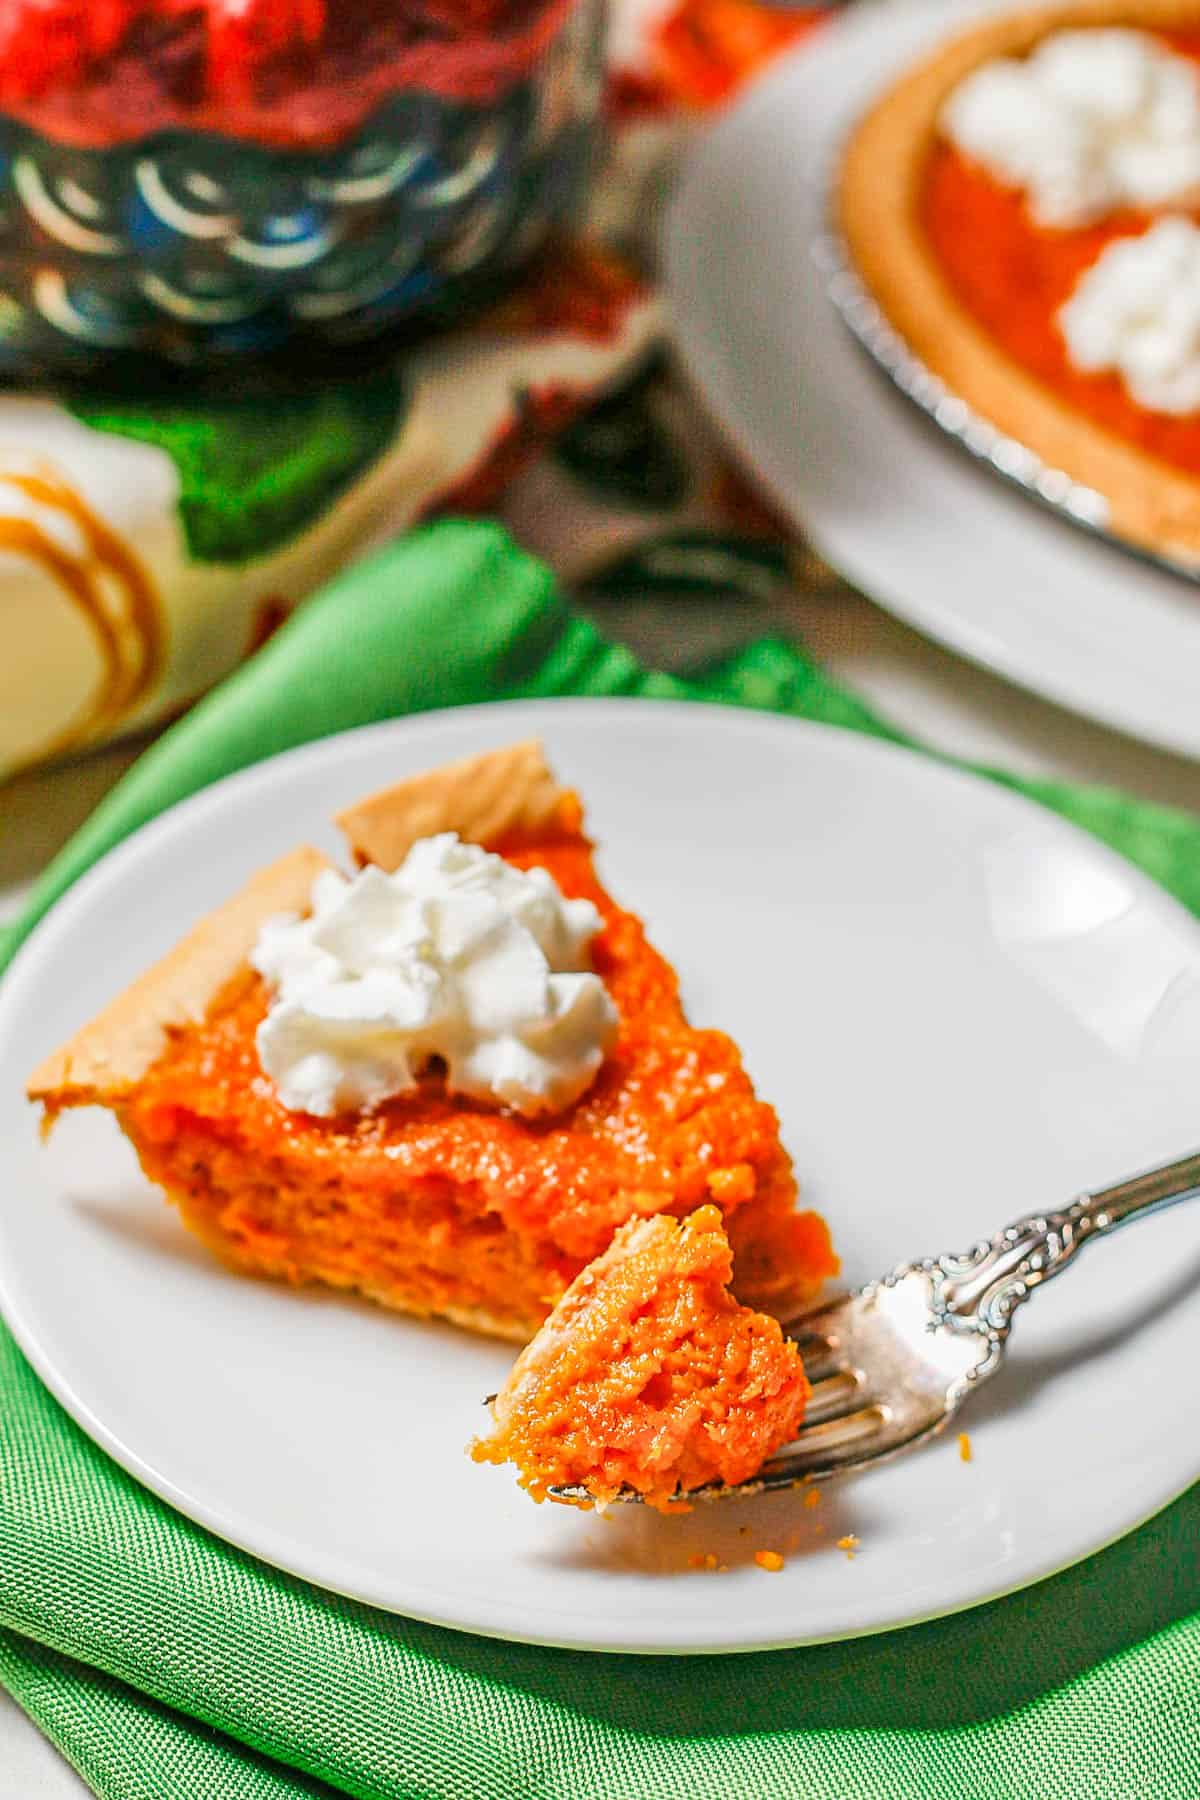 A fork holding a forkful of sweet potato pie on a small white plate.